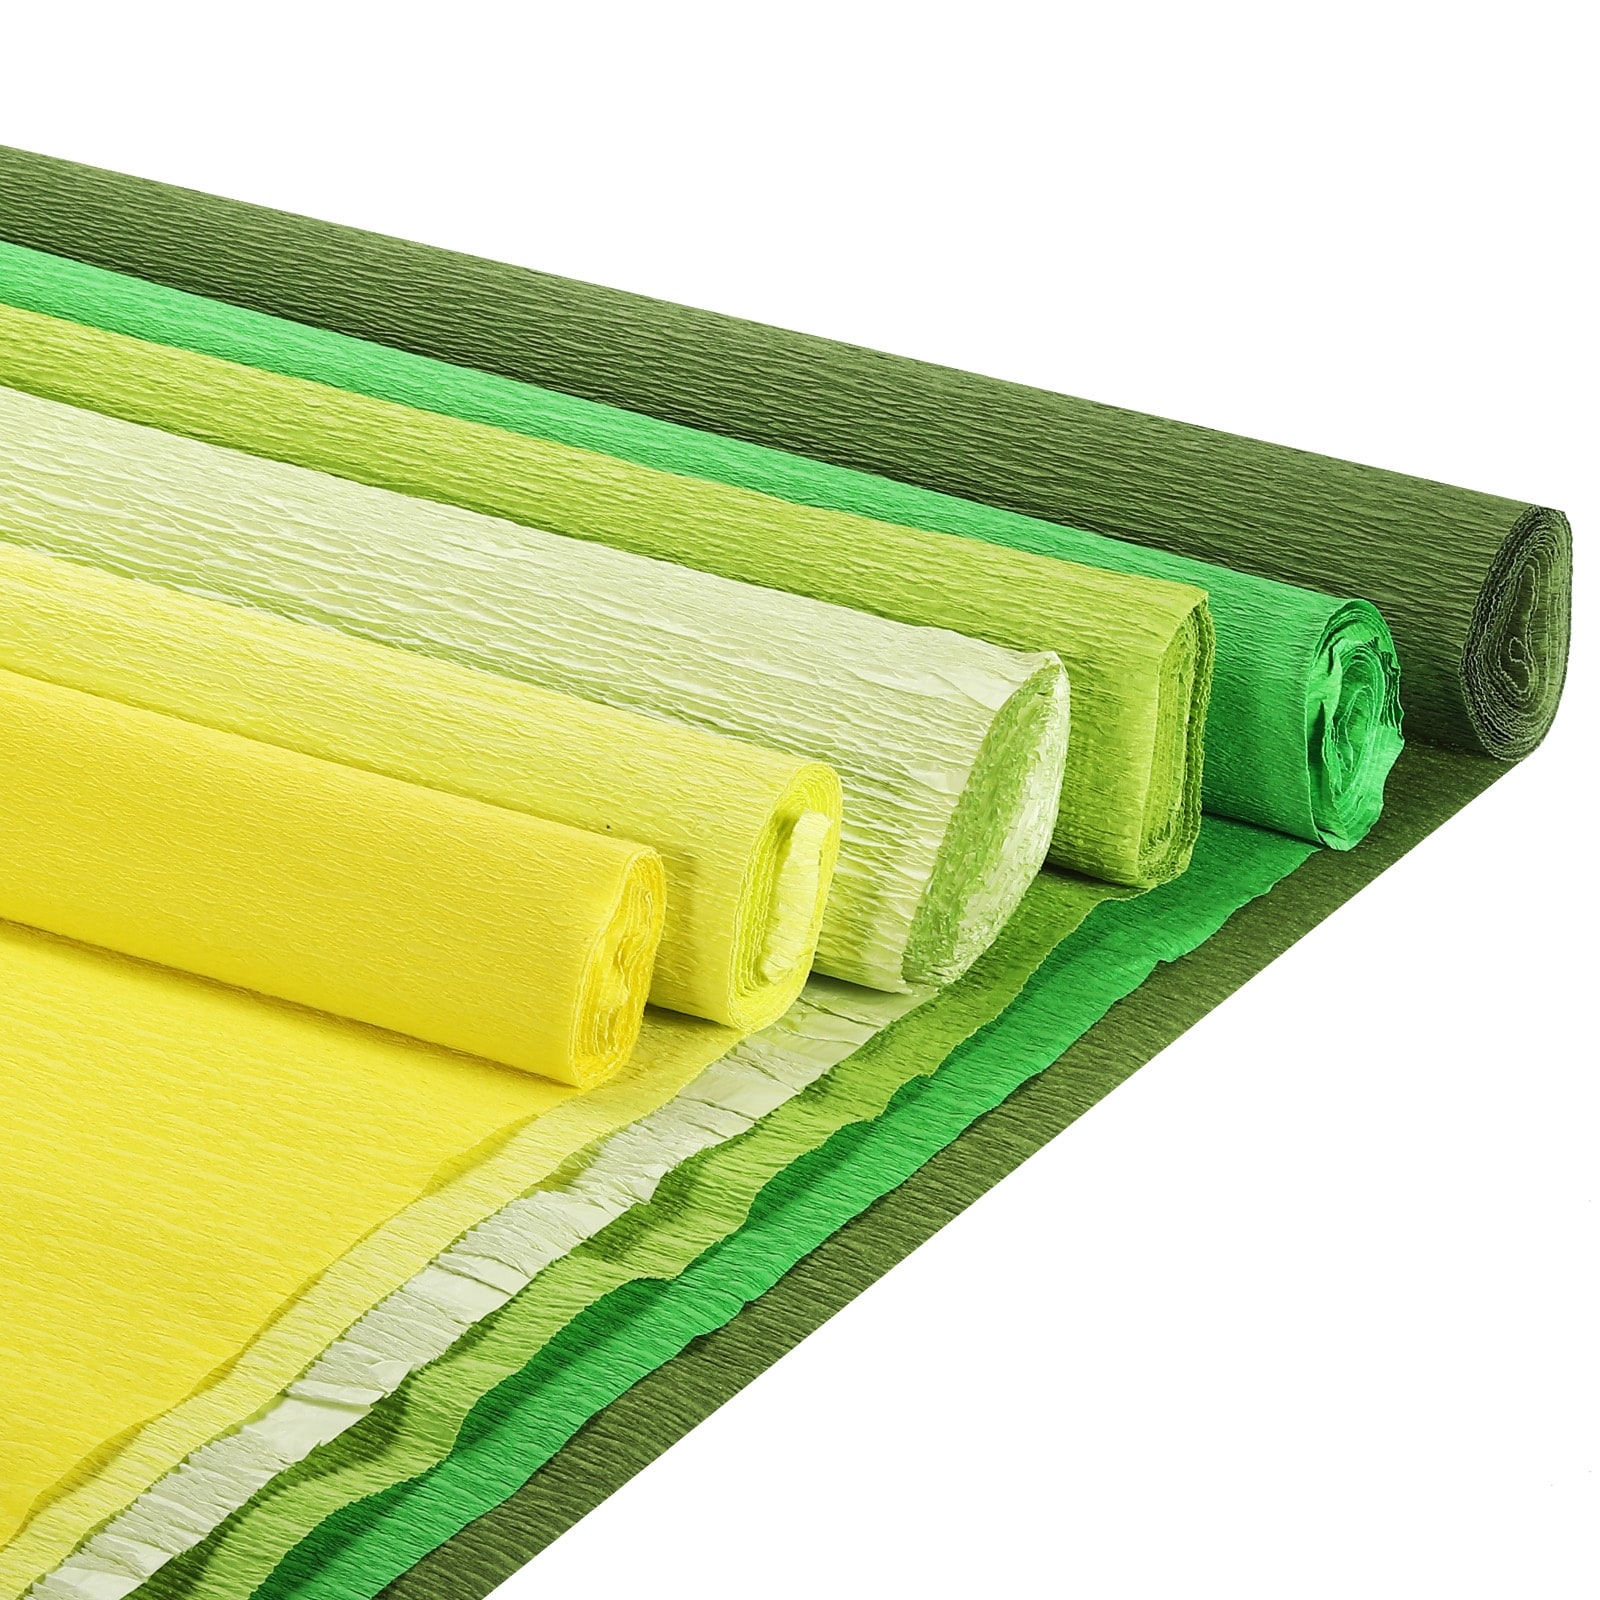 Crepe Paper Sheets 5 Rolls 7.5ft in 5 Colors for Party Decorations